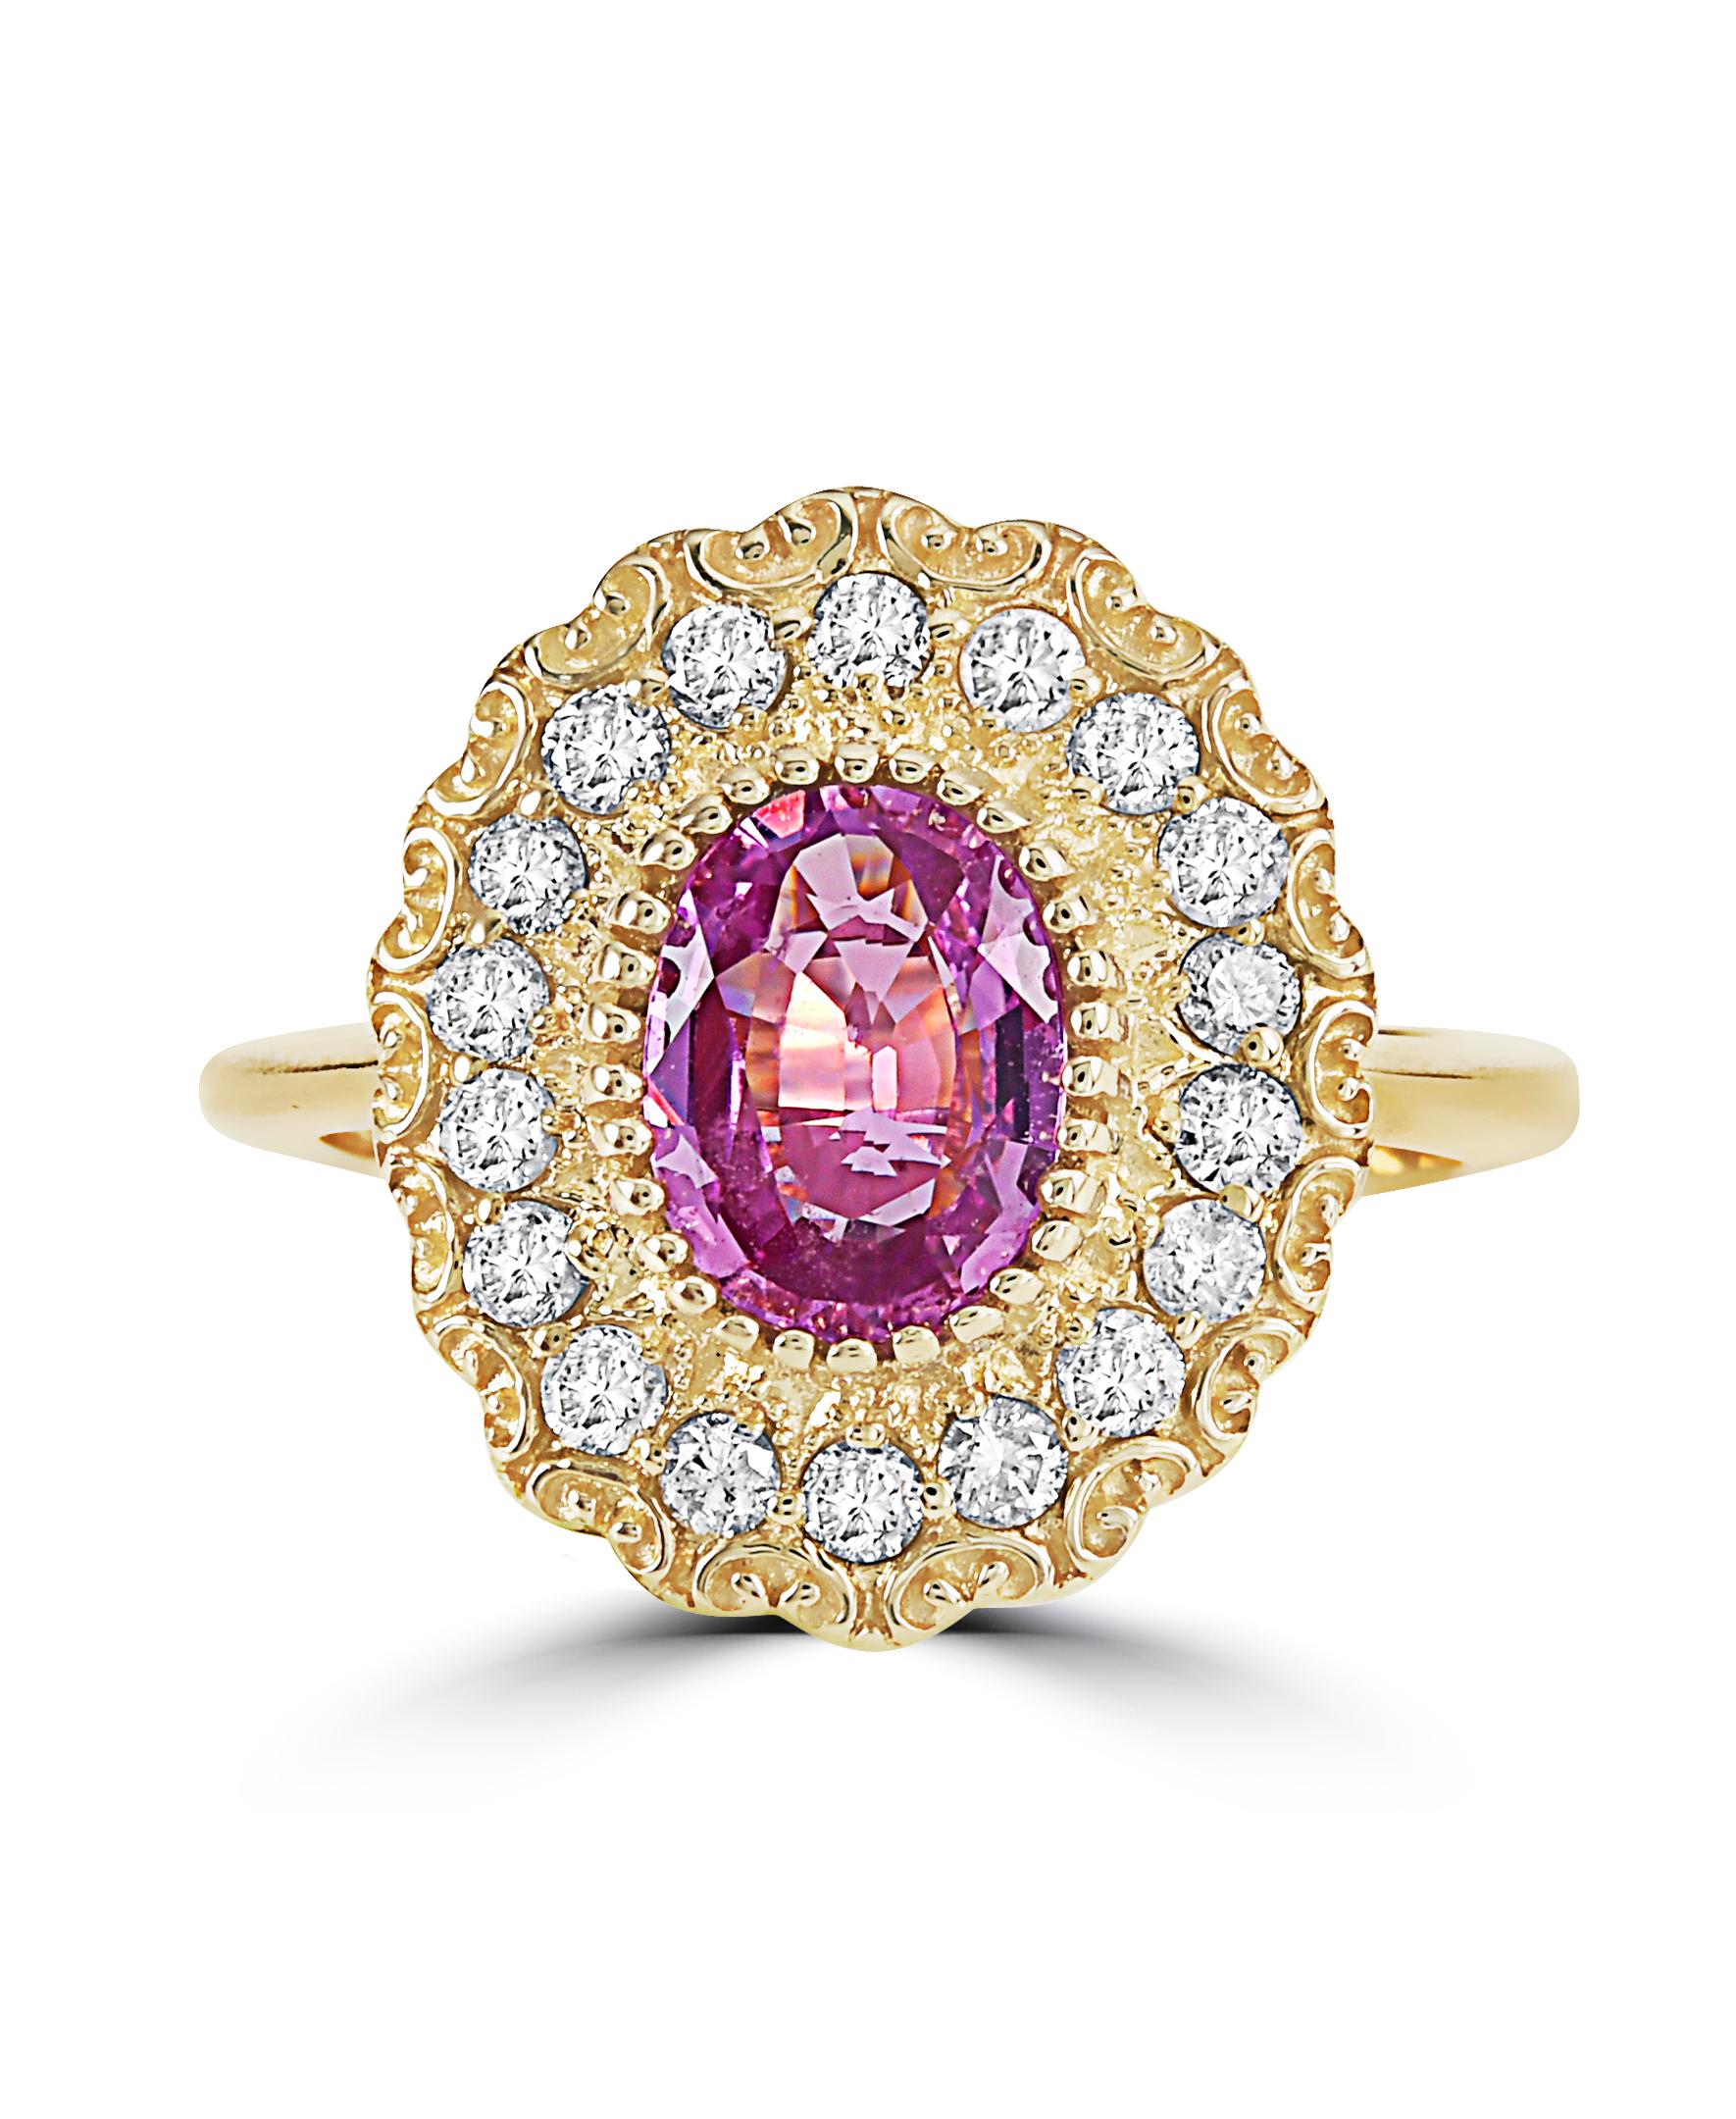 This Effy design ring is set in 14K Yellow gold. The center stone is an oval shape Pink Sapphire with a total weight of 1.42ct.
The diamonds are round in shape, with a total weight is 0.44 ct.
This ring is a sizable 7. 
The item number is B742.